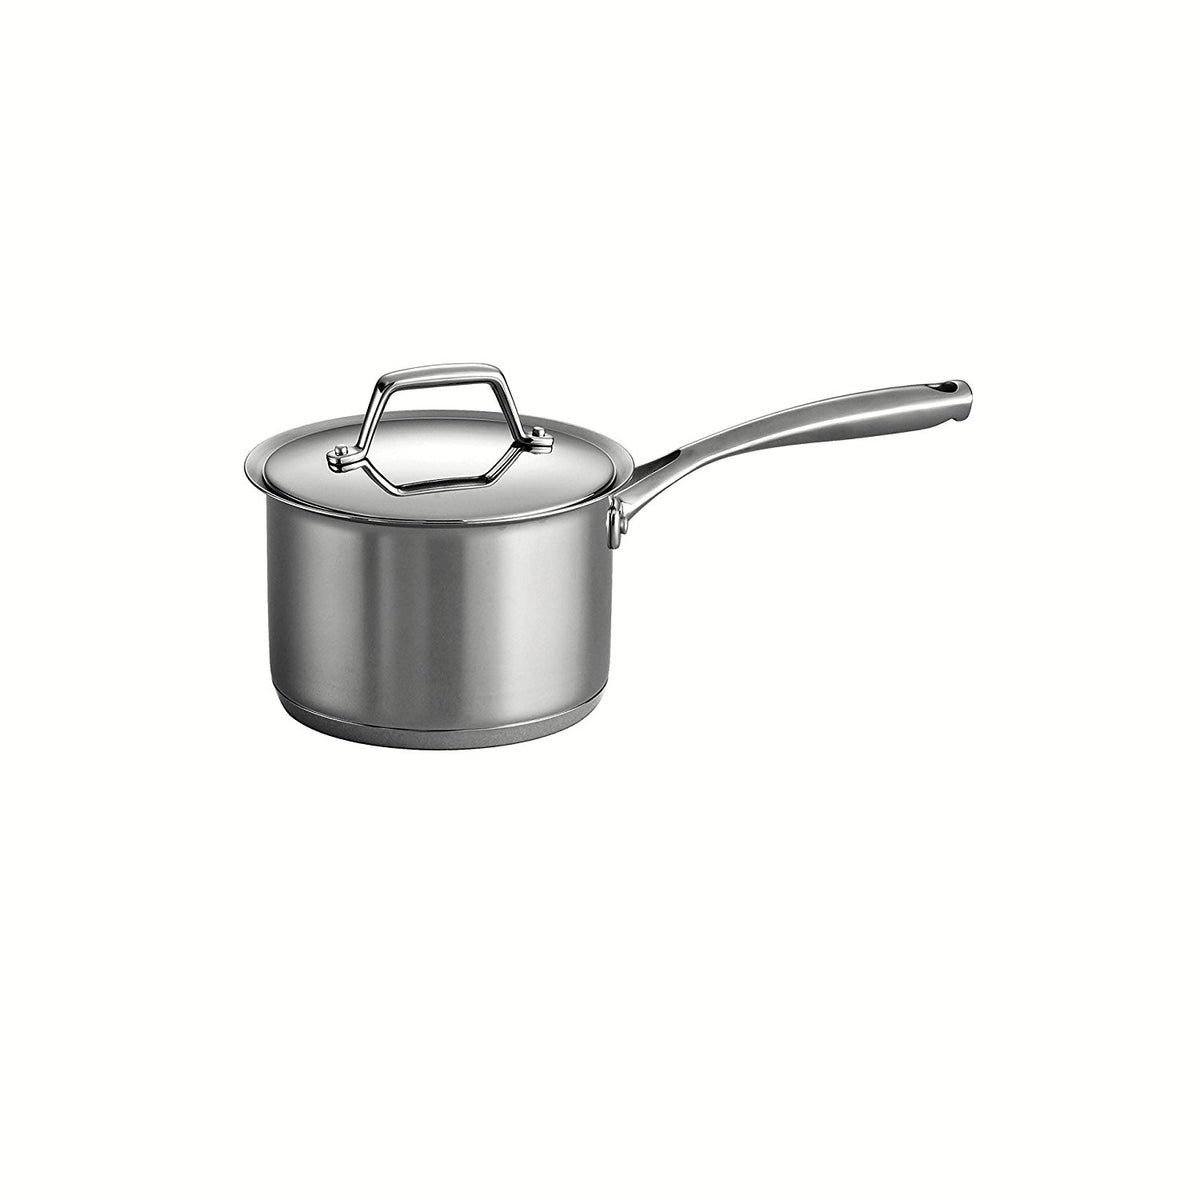 Tramontina 80101-024DS 2QT Gourmet Prima 18/10 Tri-Ply Base Covered Sauce Pan, Stainless Steel - Induction Ready, Dishwasher Safe, Oven Safe COOKPOT